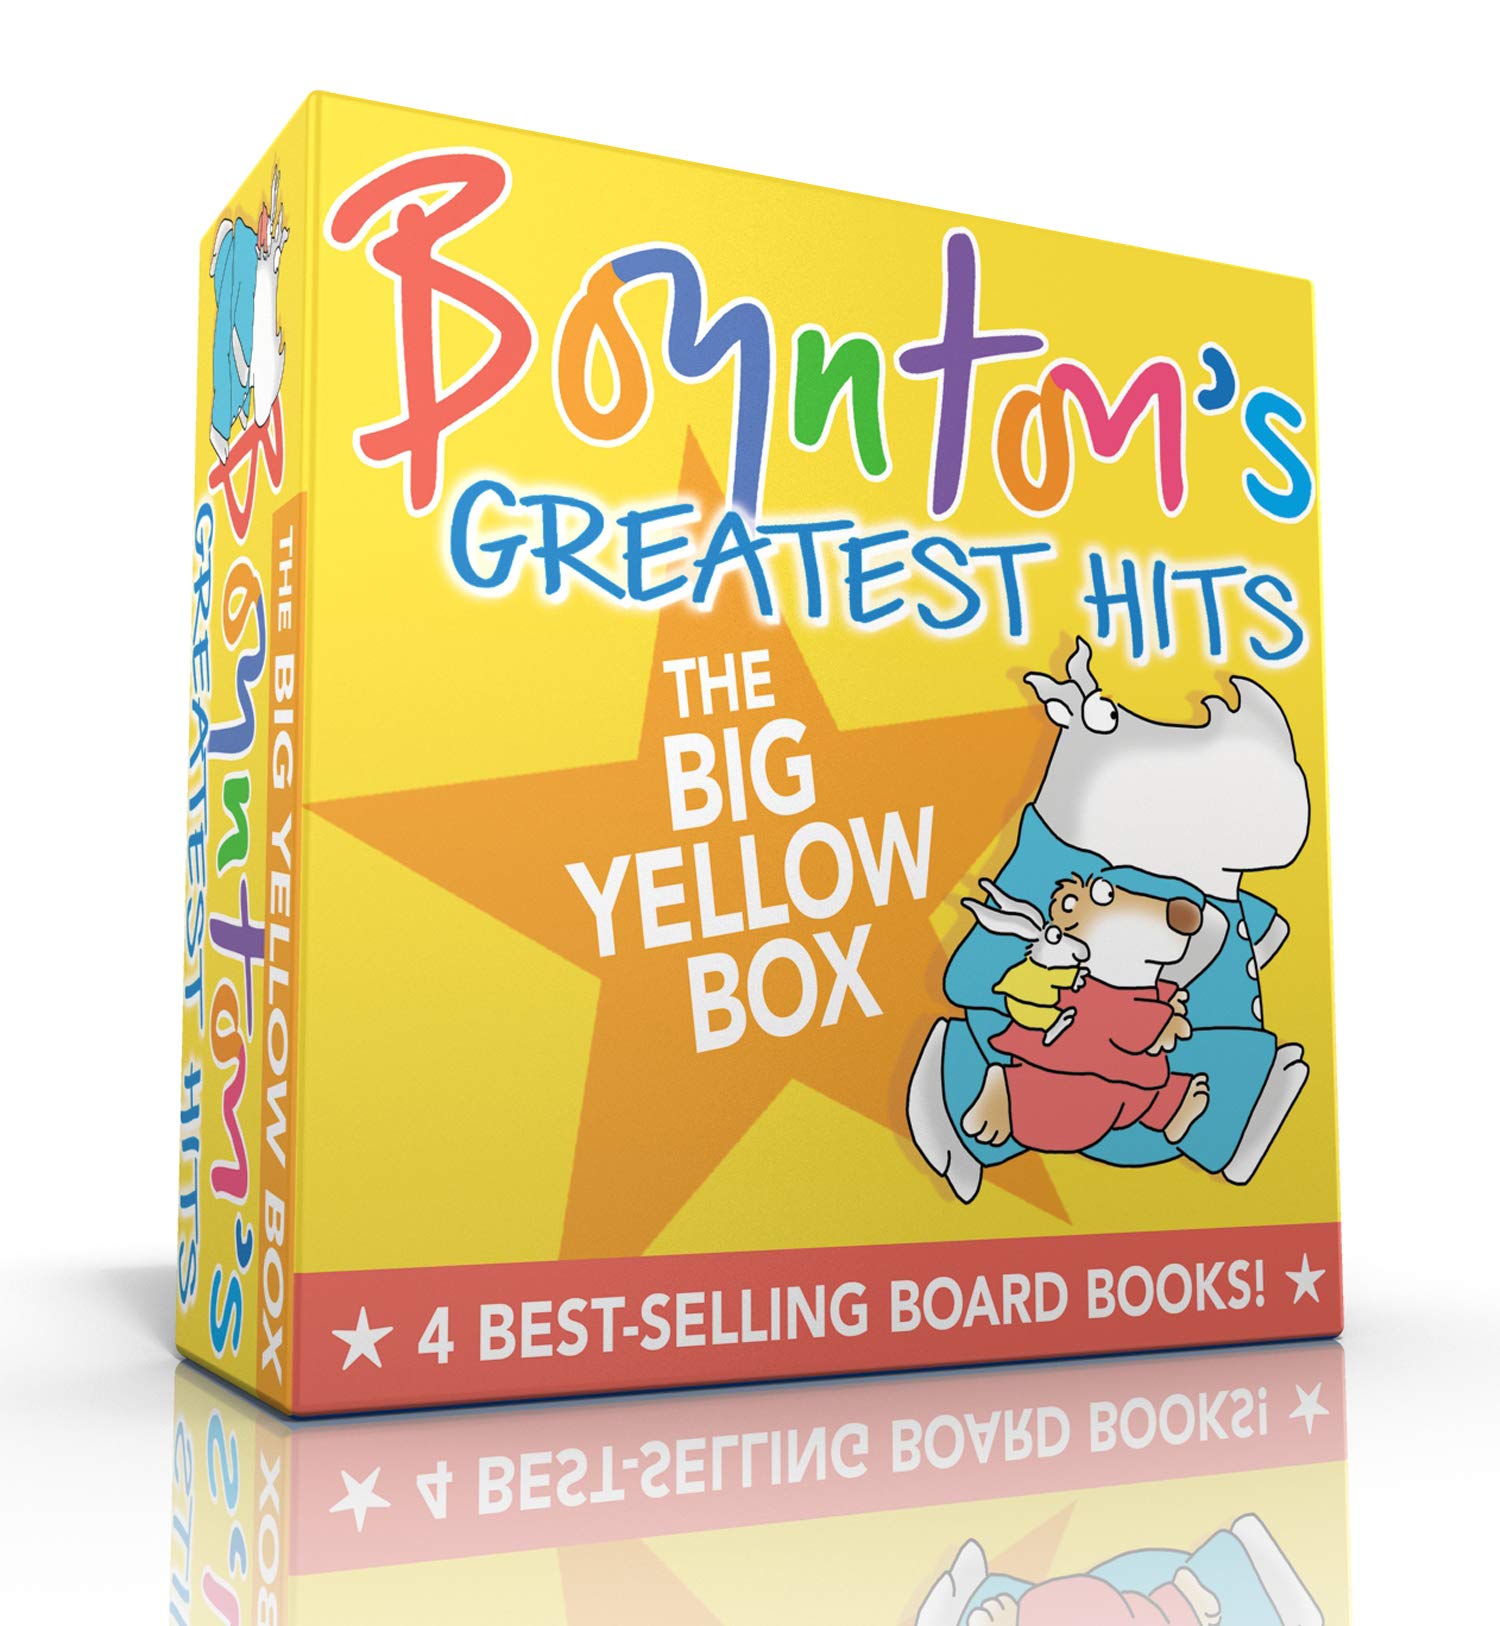 Boynton's Greatest Hits The Big Yellow Box : The Going-to-Bed Book ; Horns to Toes ; Opposites ; But Not the Hippopotamus : Box set - Board book